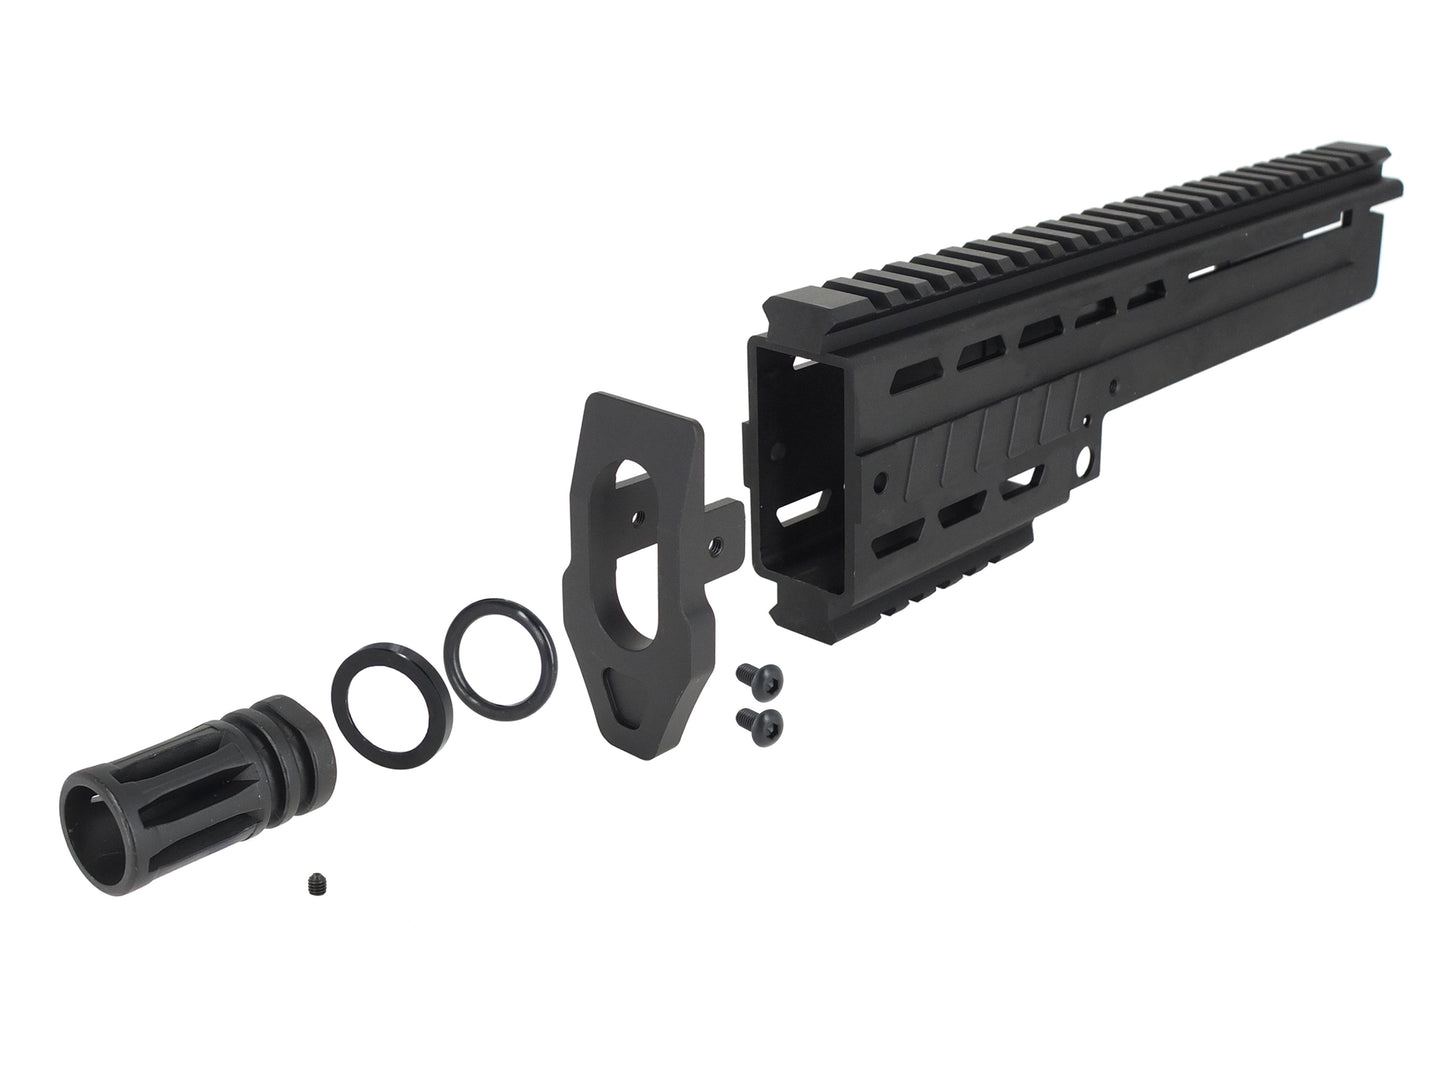 King Arms M11 PDW CNC Kit for KWA / KSC M11 SMG.